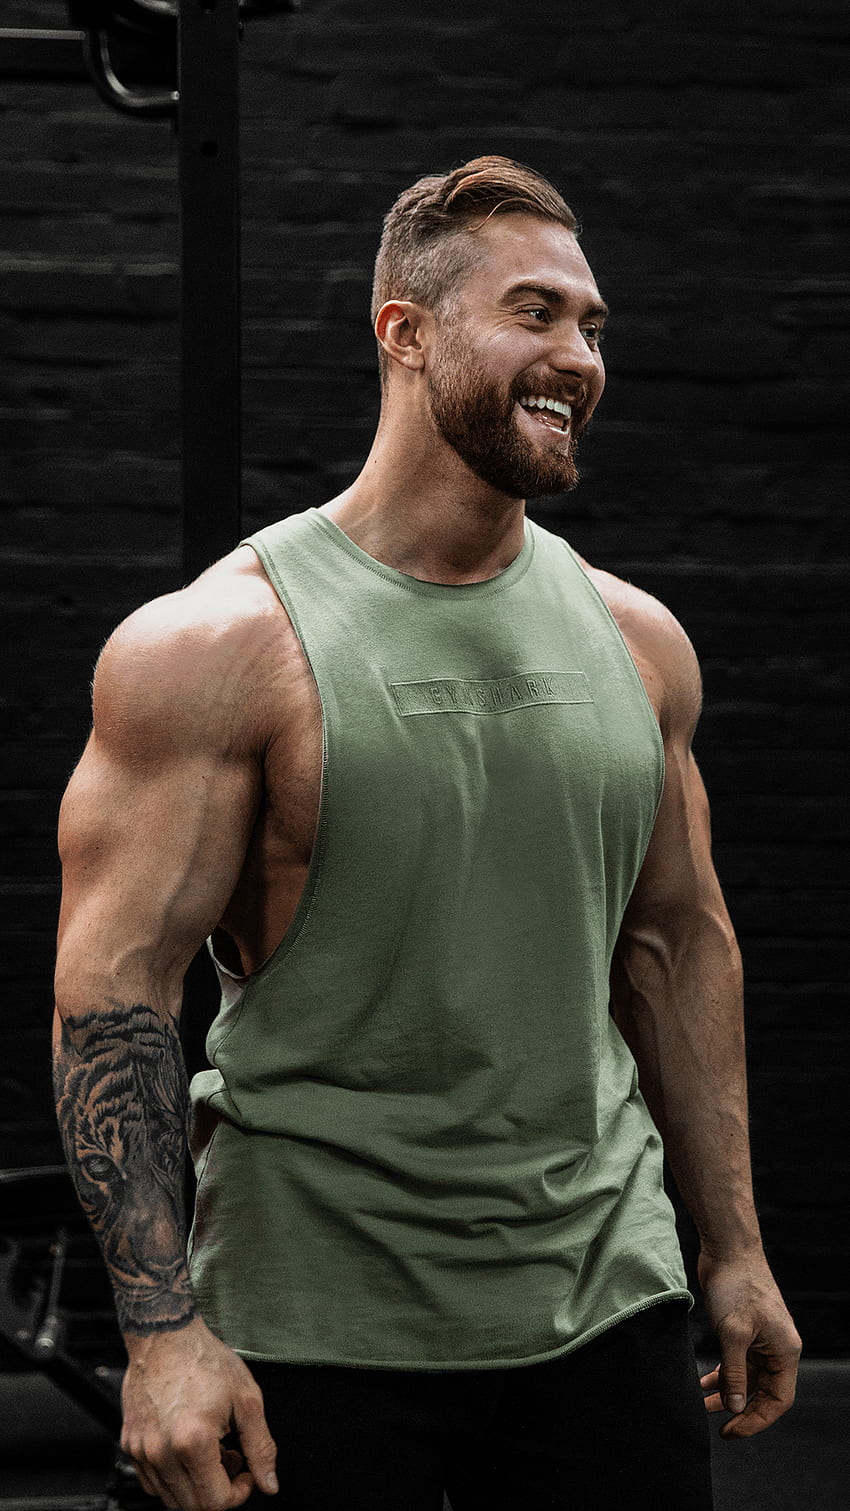 Chris Bumstead styles the Crucial Tank for his upper body workouts! Killin' the game with the freshest. Ripped abs, Male fitness models, Fit women bodies HD phone wallpaper